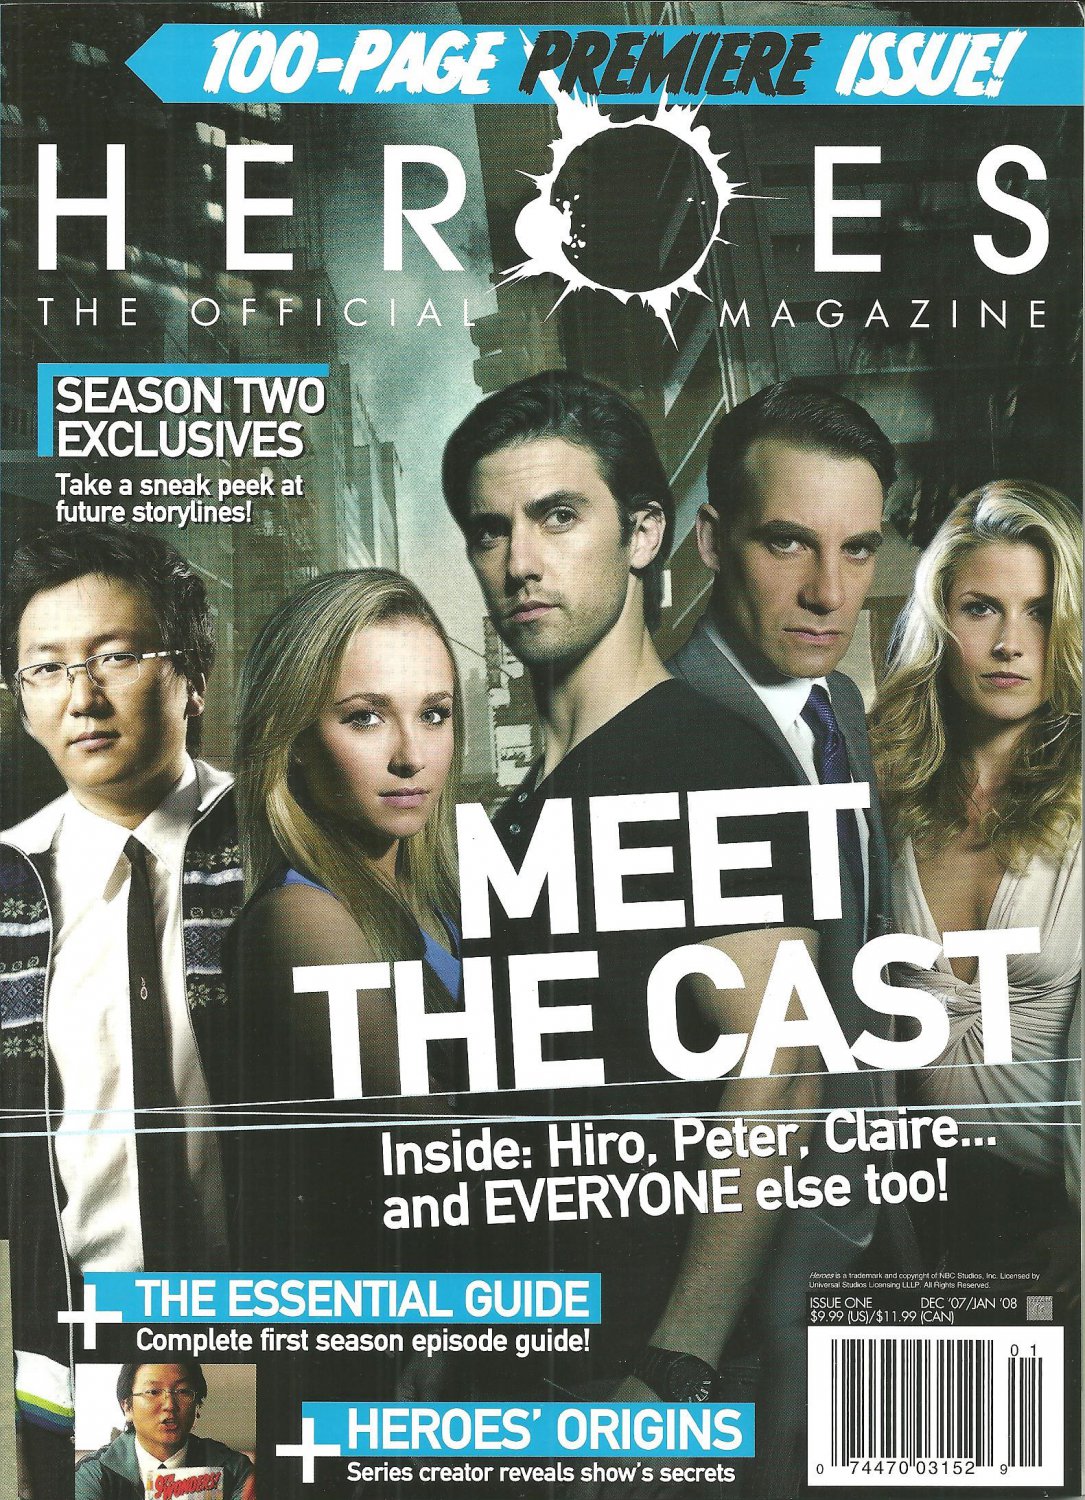 HEROES THE OFFICIAL MAGAZINE 100-Page Premiere Issue #1 December/January 2008